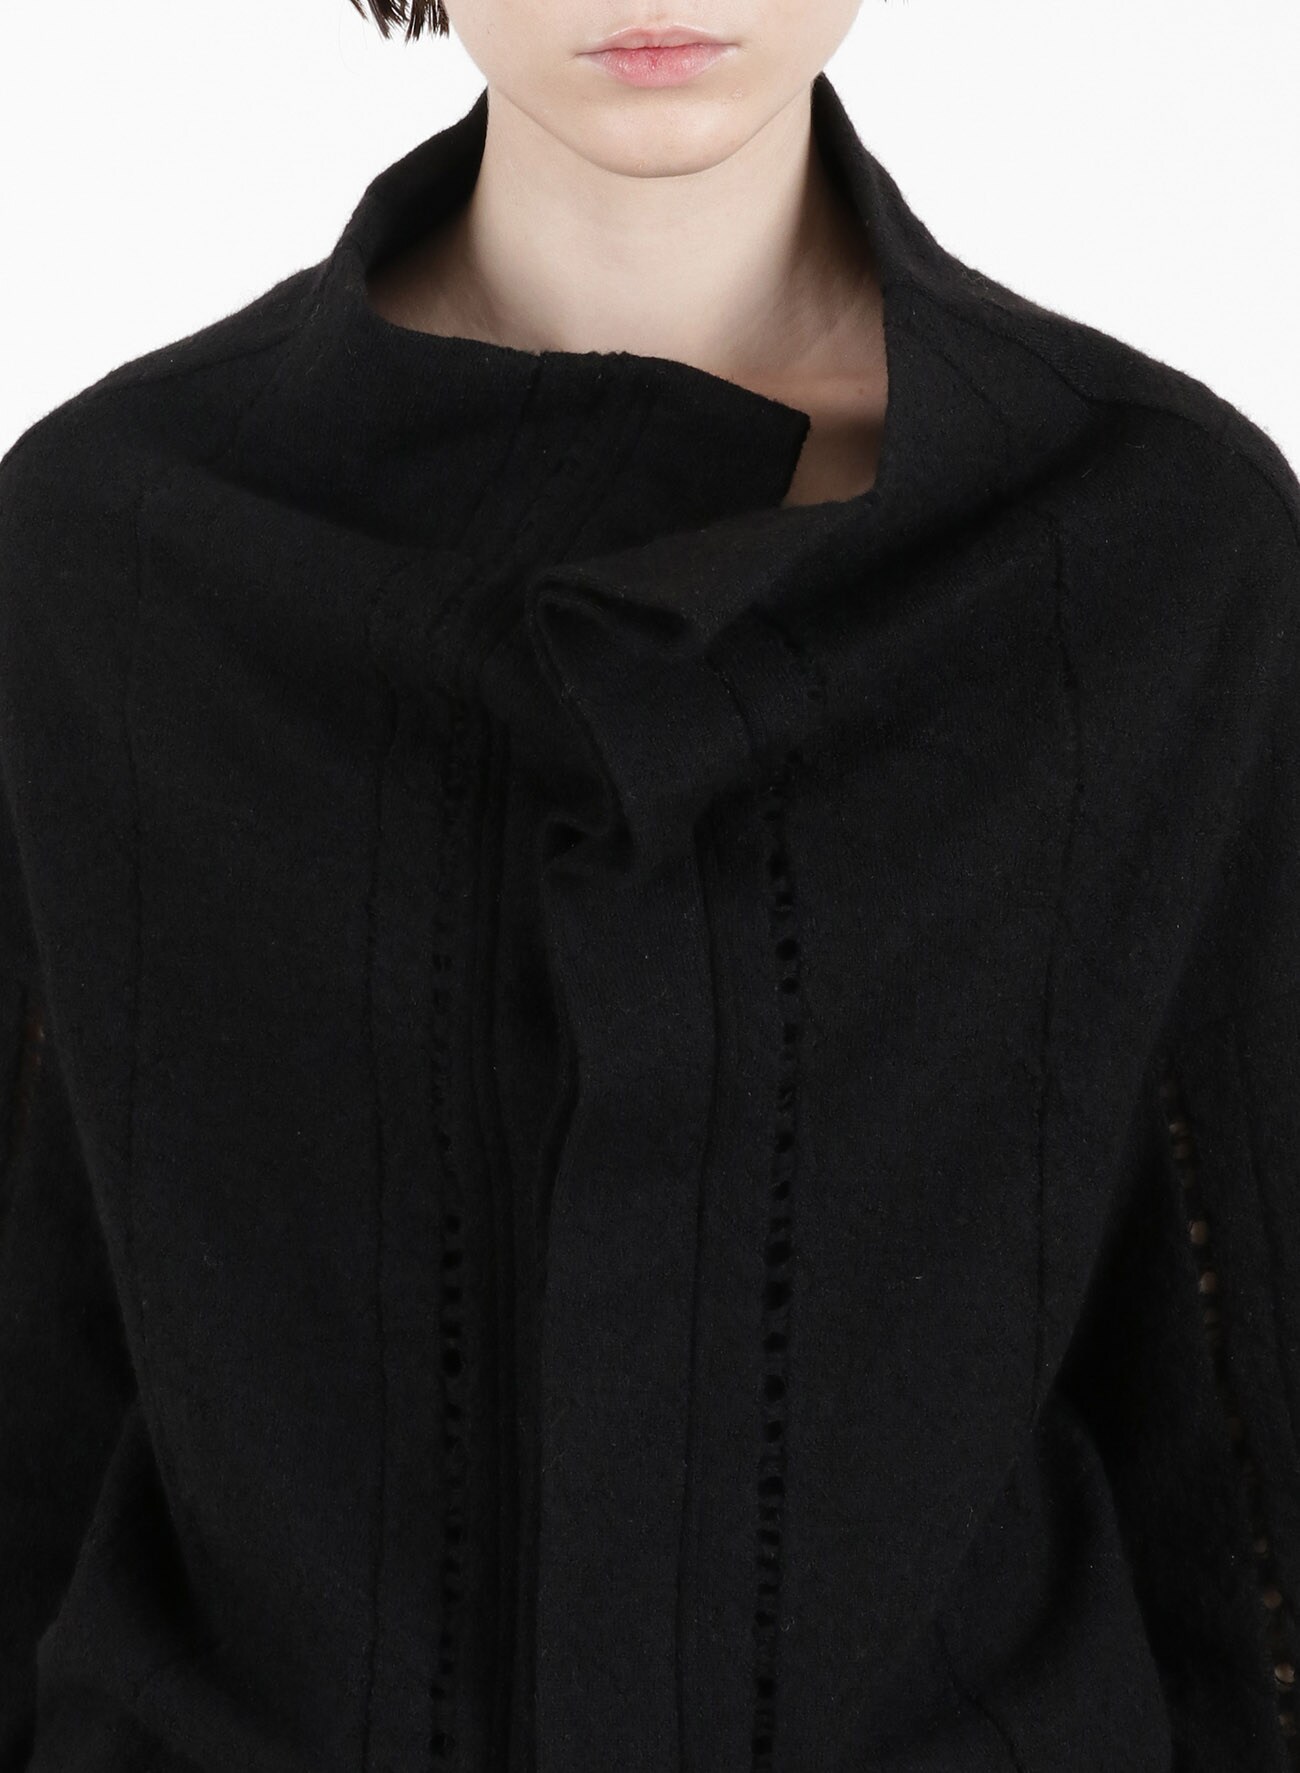 PARTIAL DROP STITCH SHRINKAGE OFF NECK FLY CARDIGAN